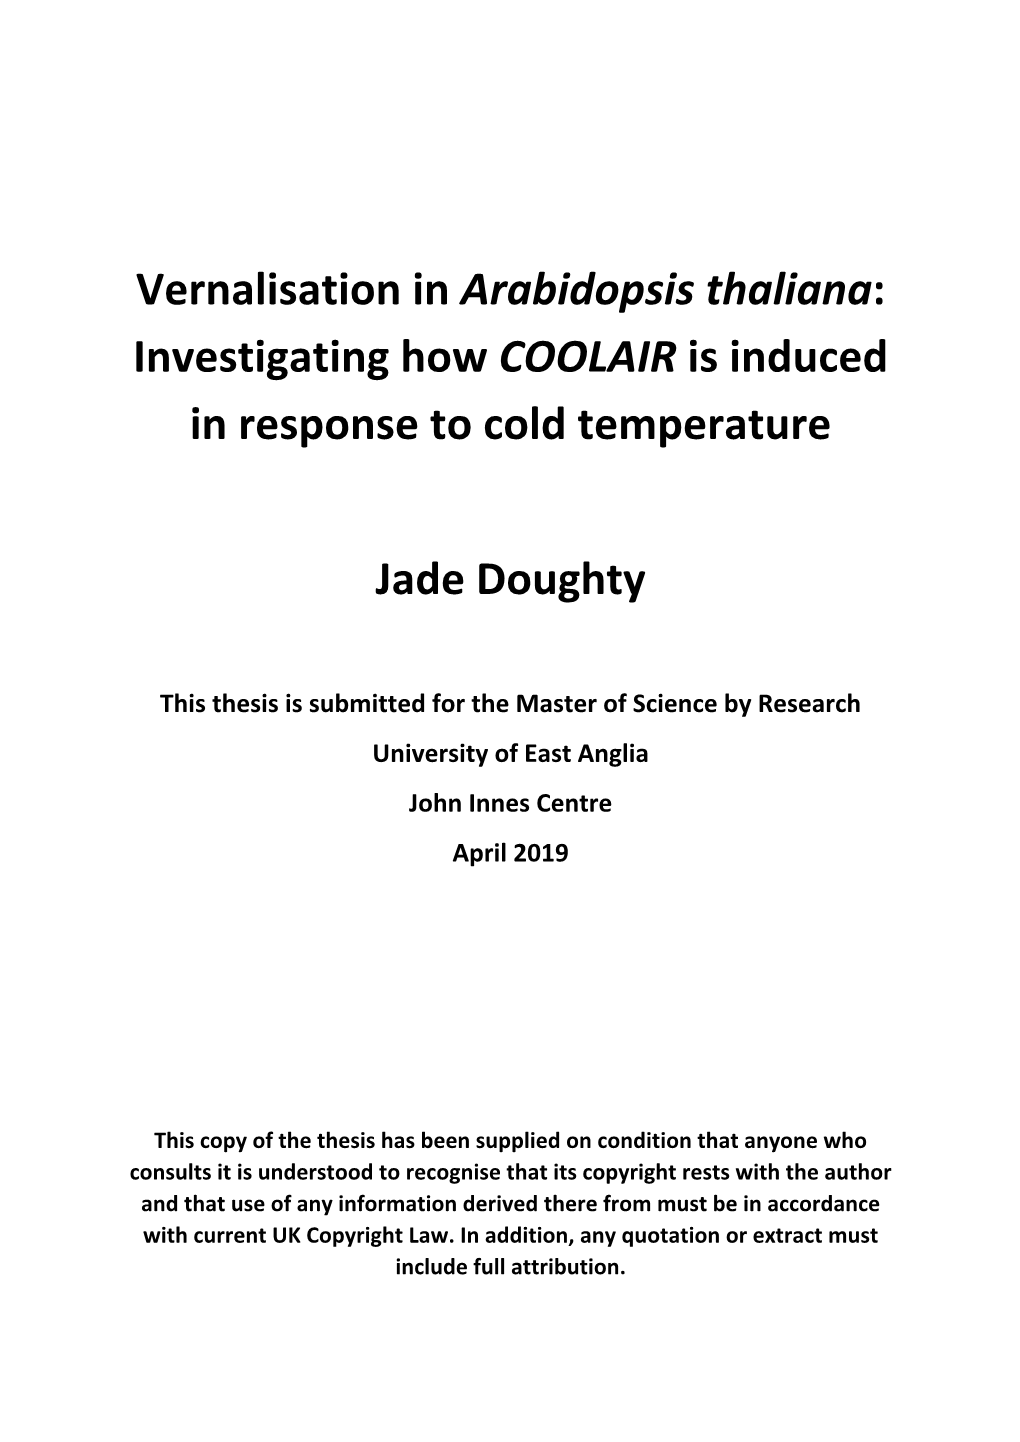 Vernalisation in Arabidopsis Thaliana: Investigating How COOLAIR Is Induced in Response to Cold Temperature